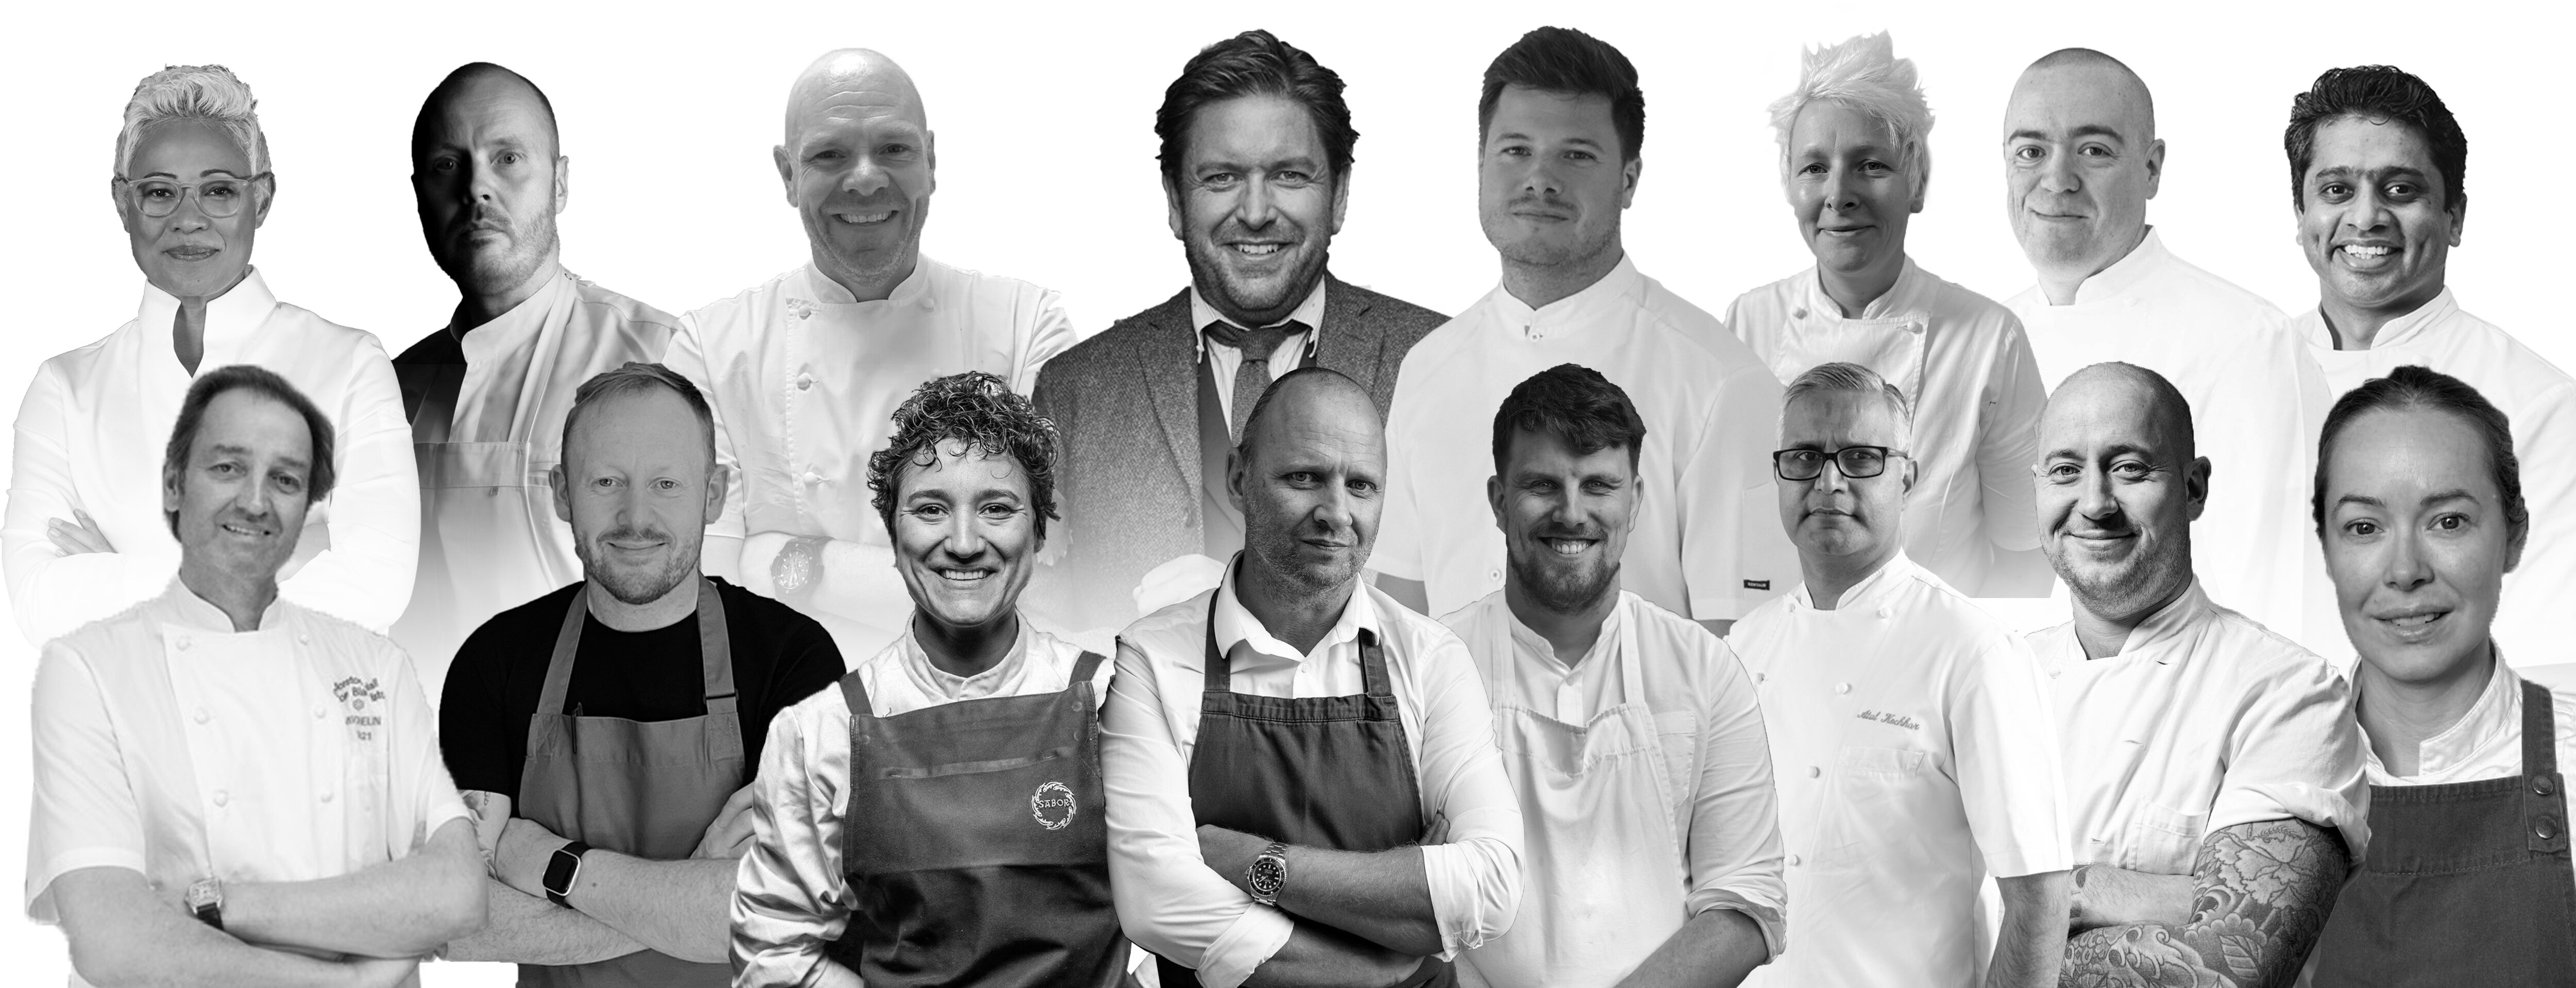 Obsession 22 to celebrate the UK and Ireland's leading chefs